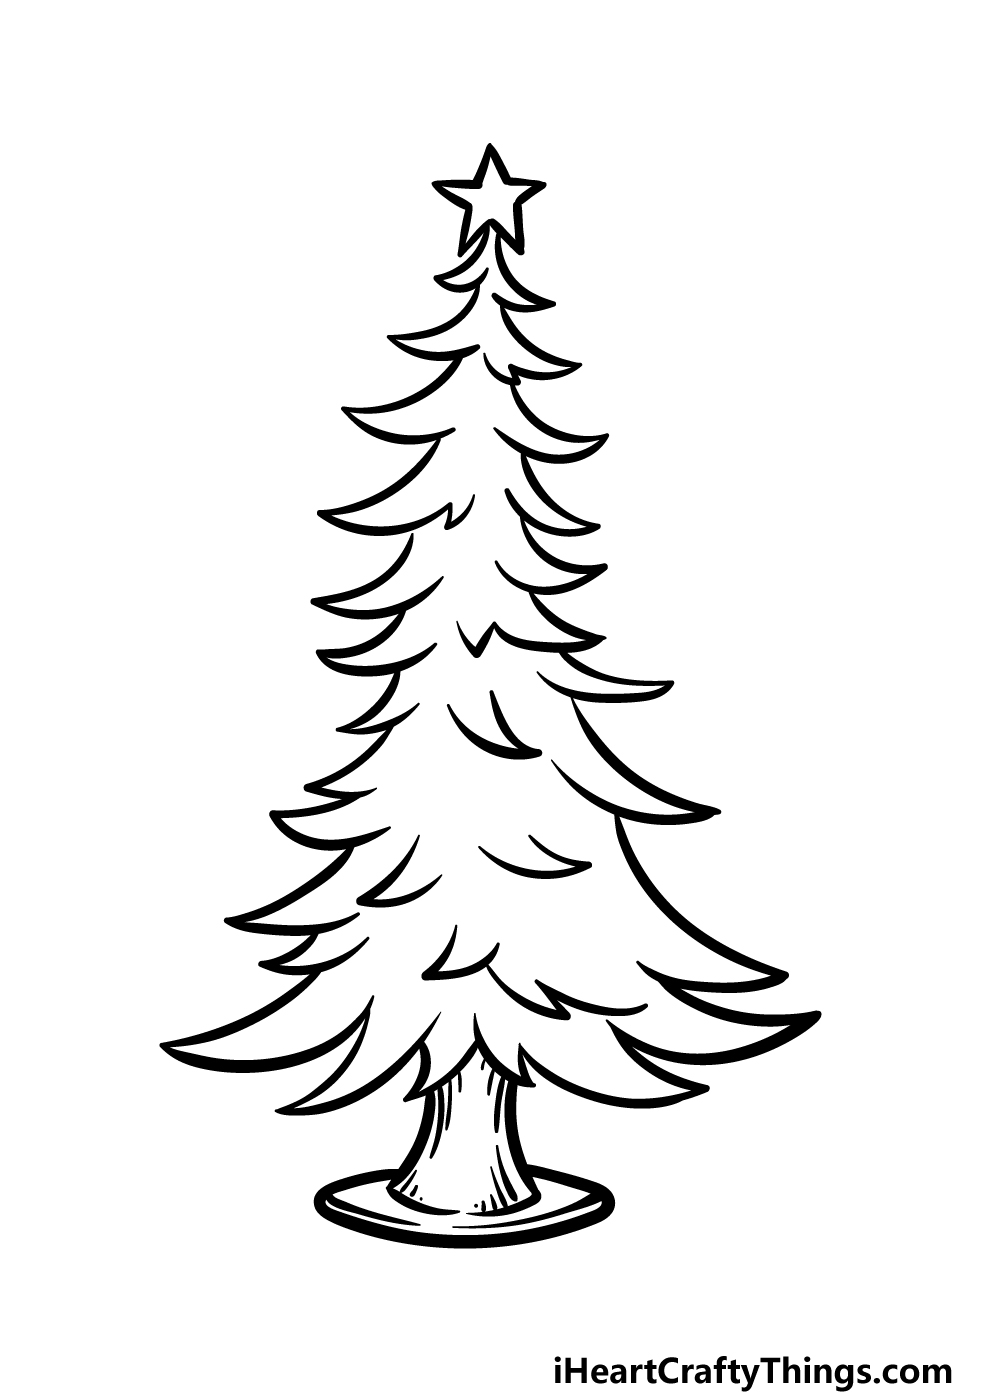 Tree drawing, ink Cut Out Stock Images & Pictures - Alamy